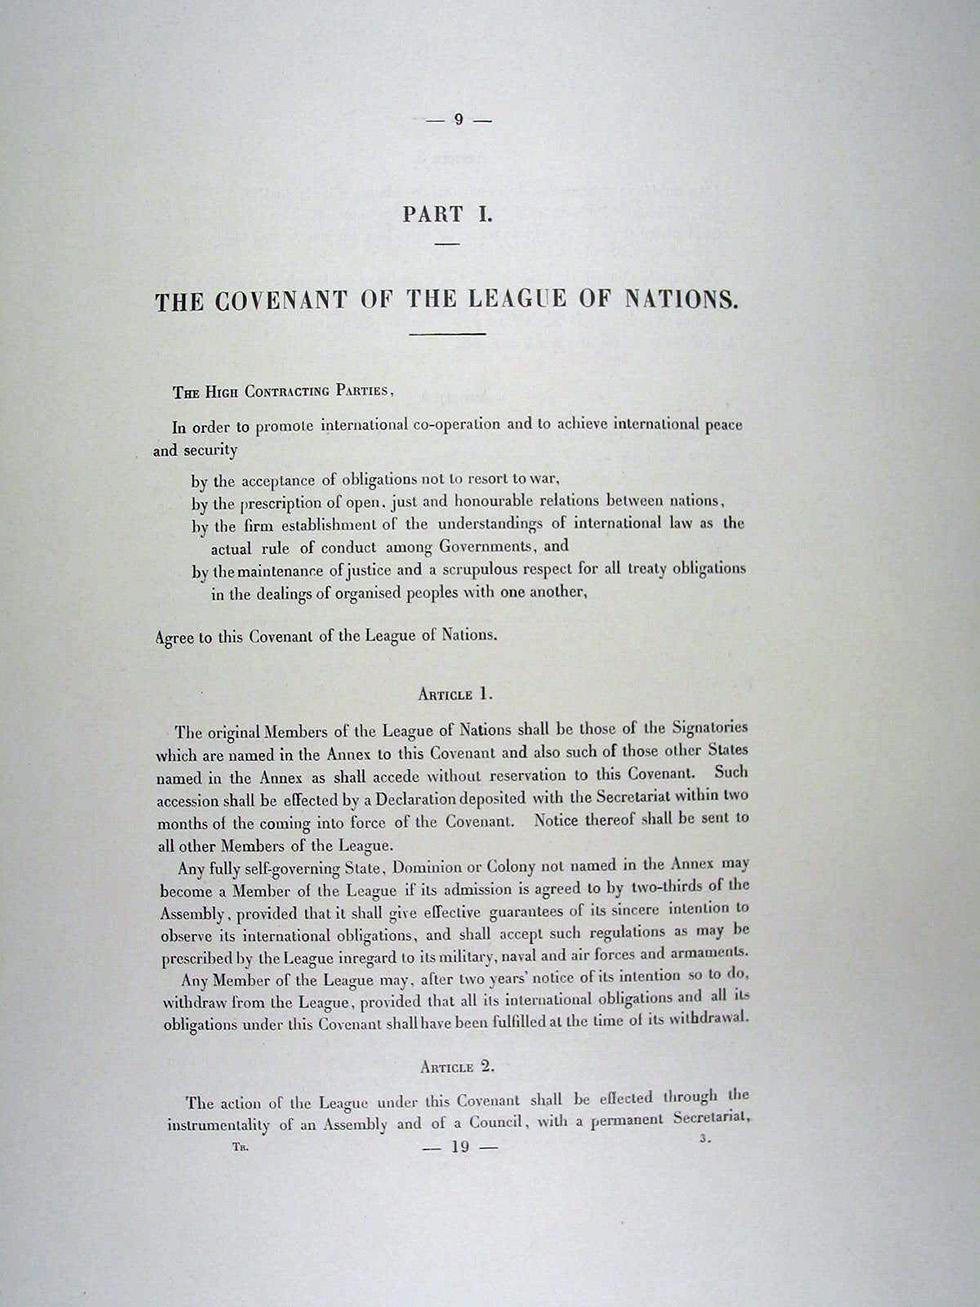 Copy of the Treaty of Versailles. Page titled 'Part 1.  The Covenant of the League of Nations.'